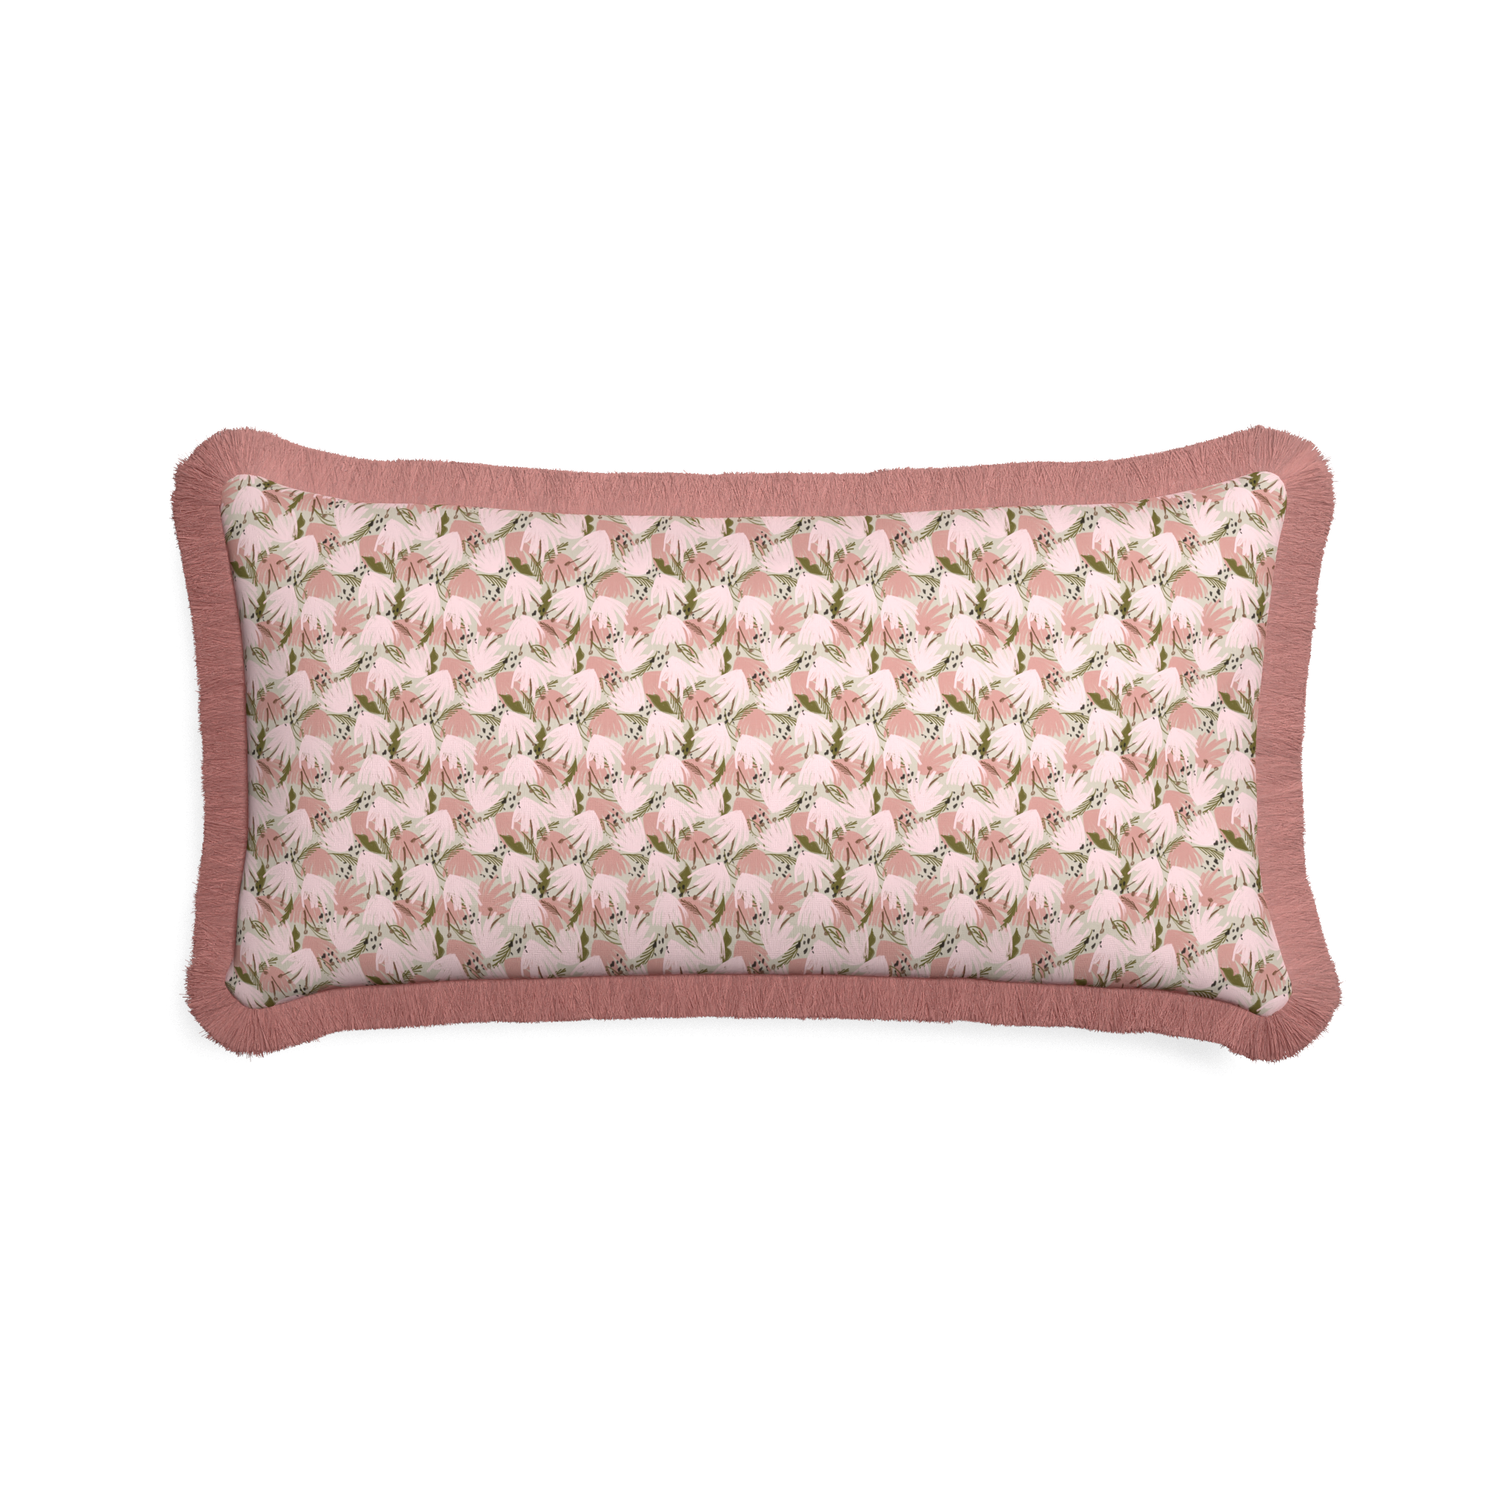 Midi-lumbar eden pink custom pink floralpillow with d fringe on white background